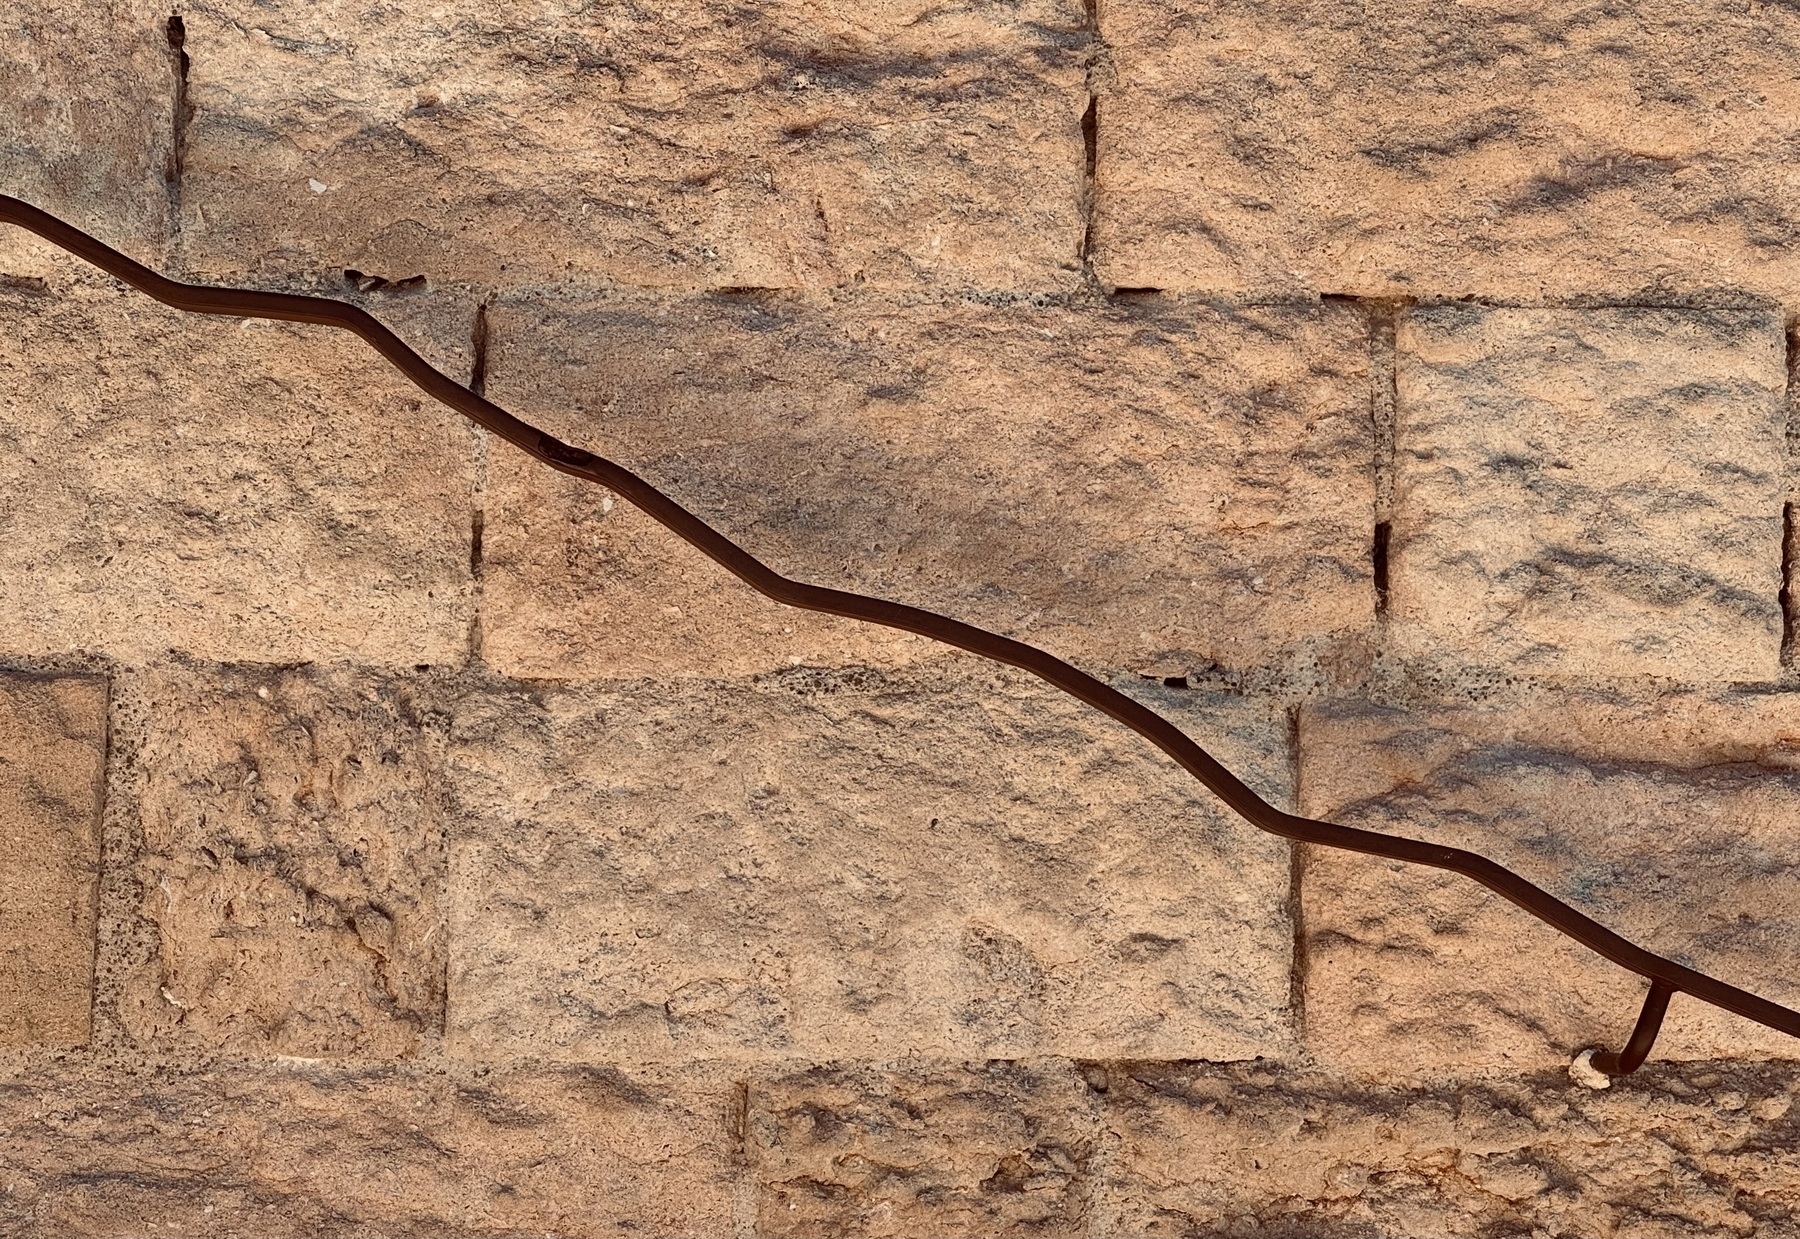 A wiggly metal handrail going down a stone wall.